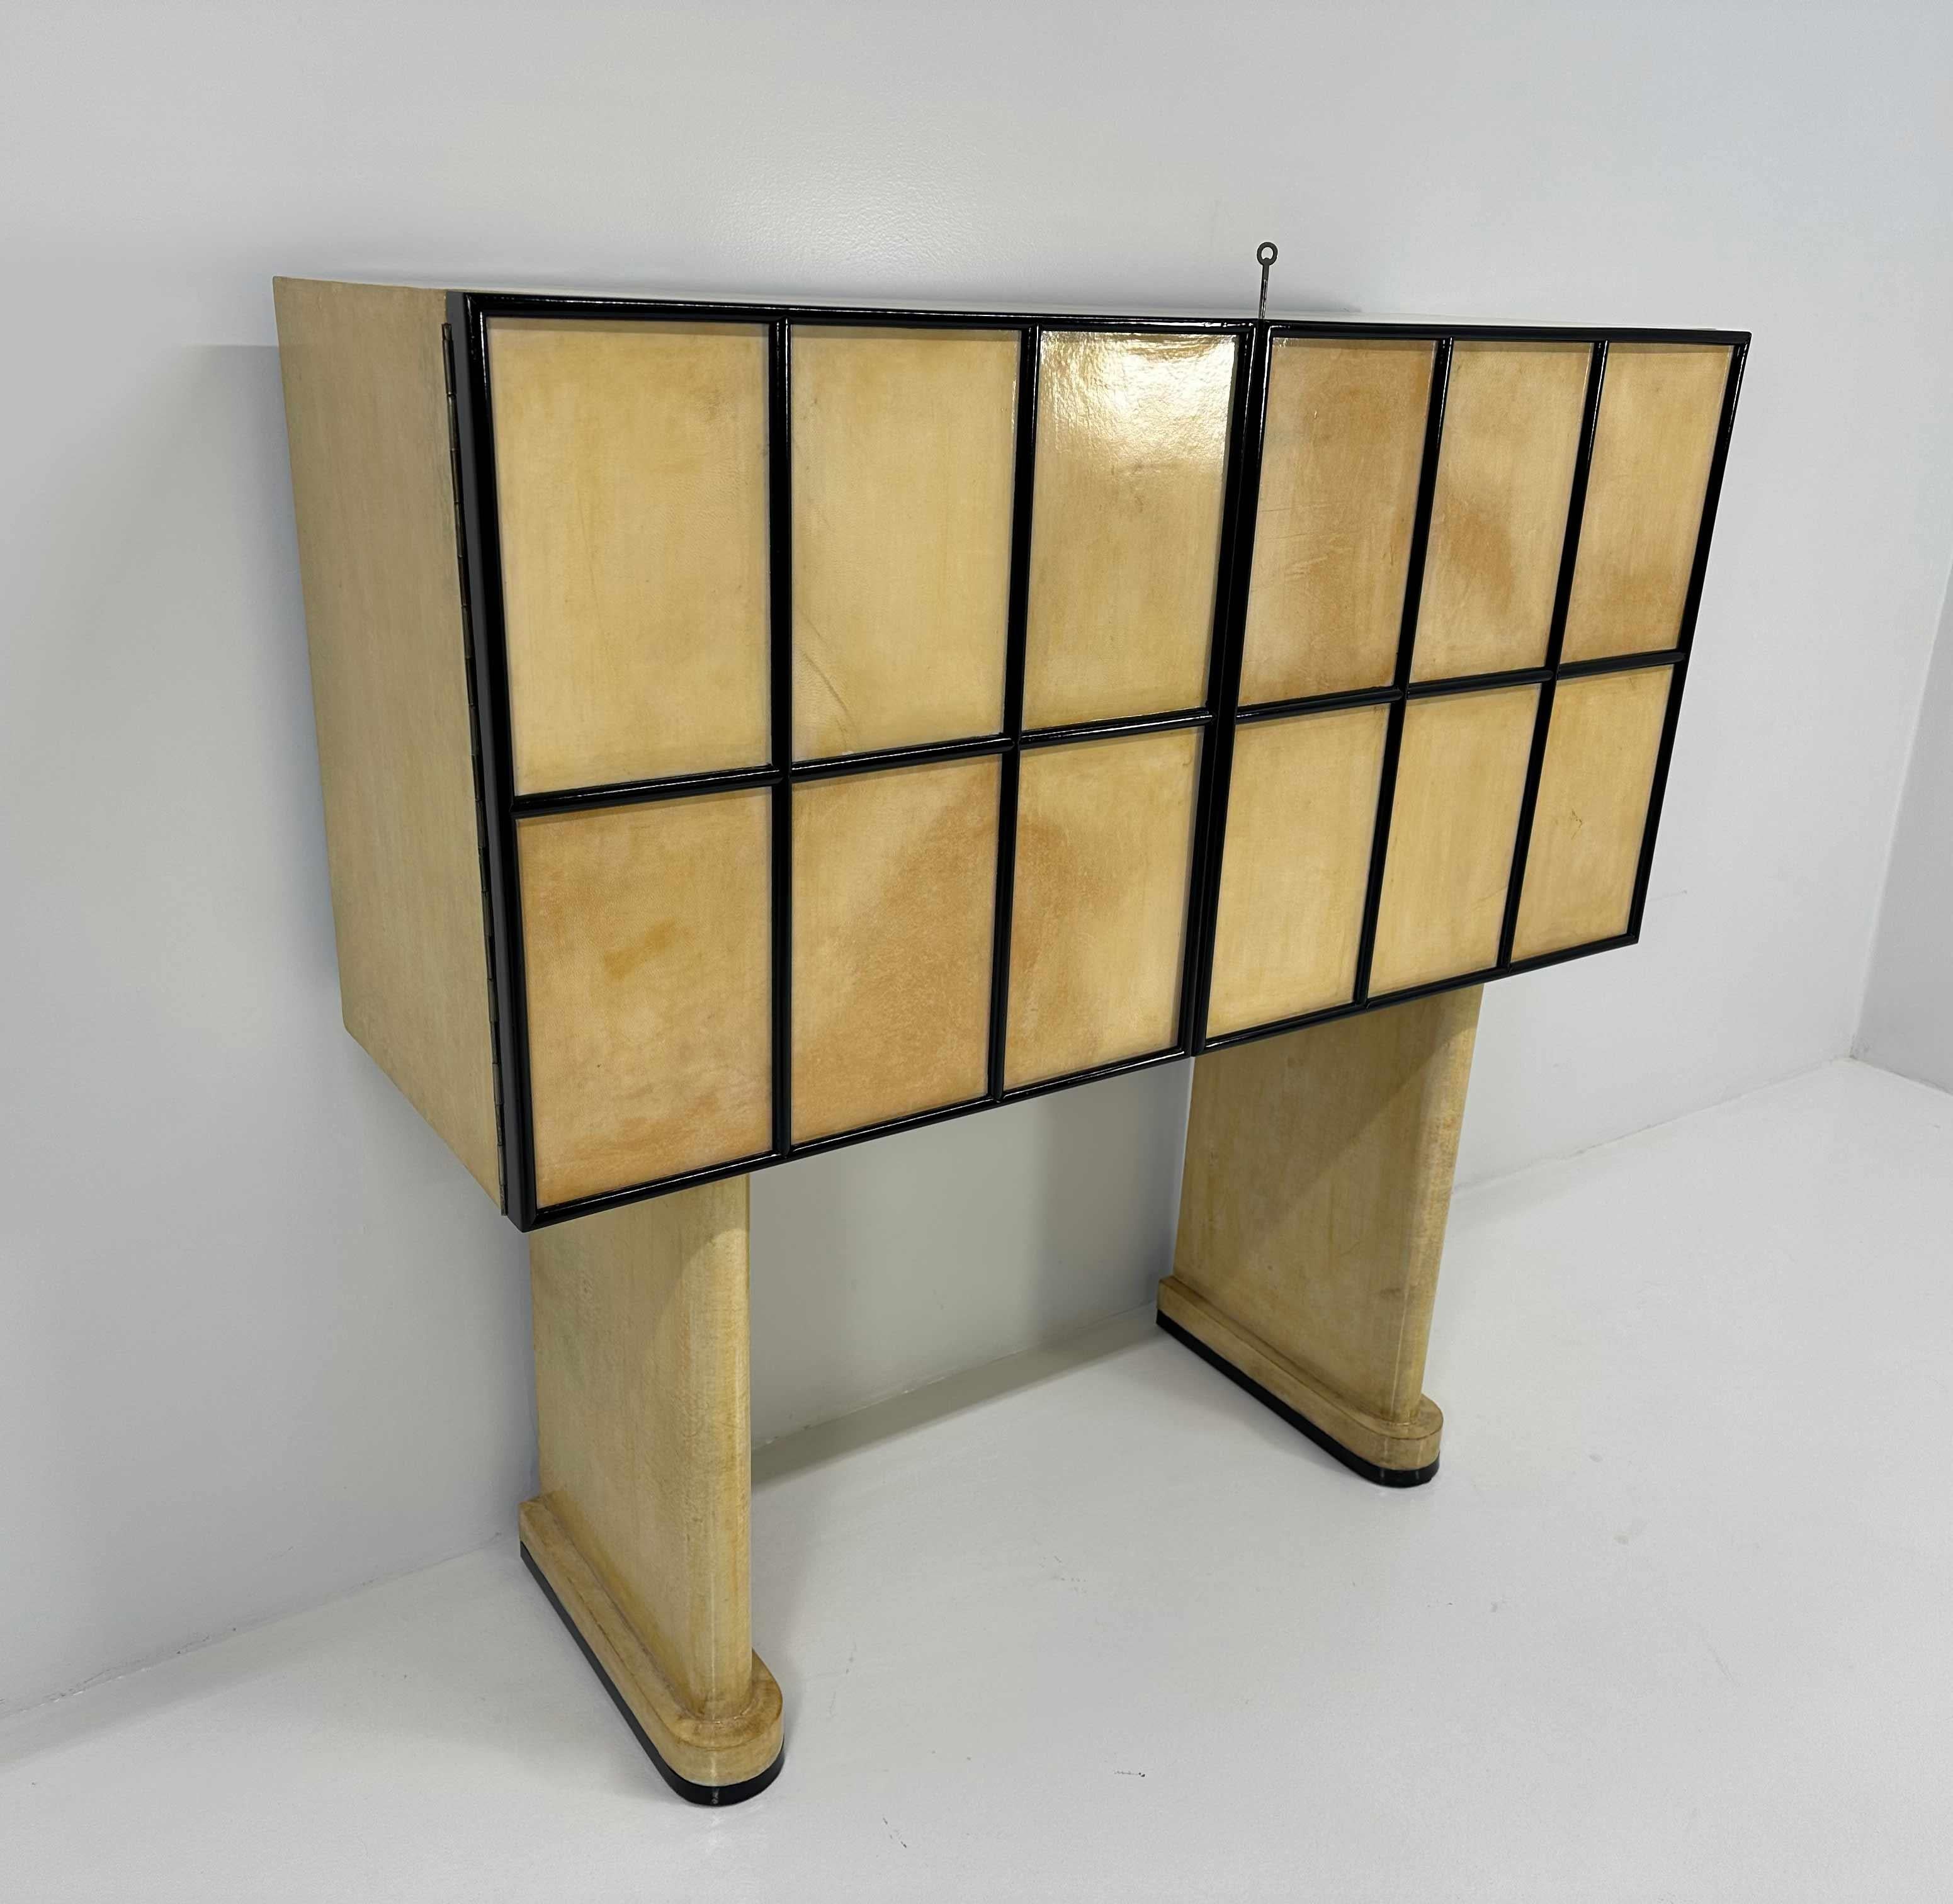 Italian Art Deco Parchment and Black Lacquered Cabinet, 1930s For Sale 1